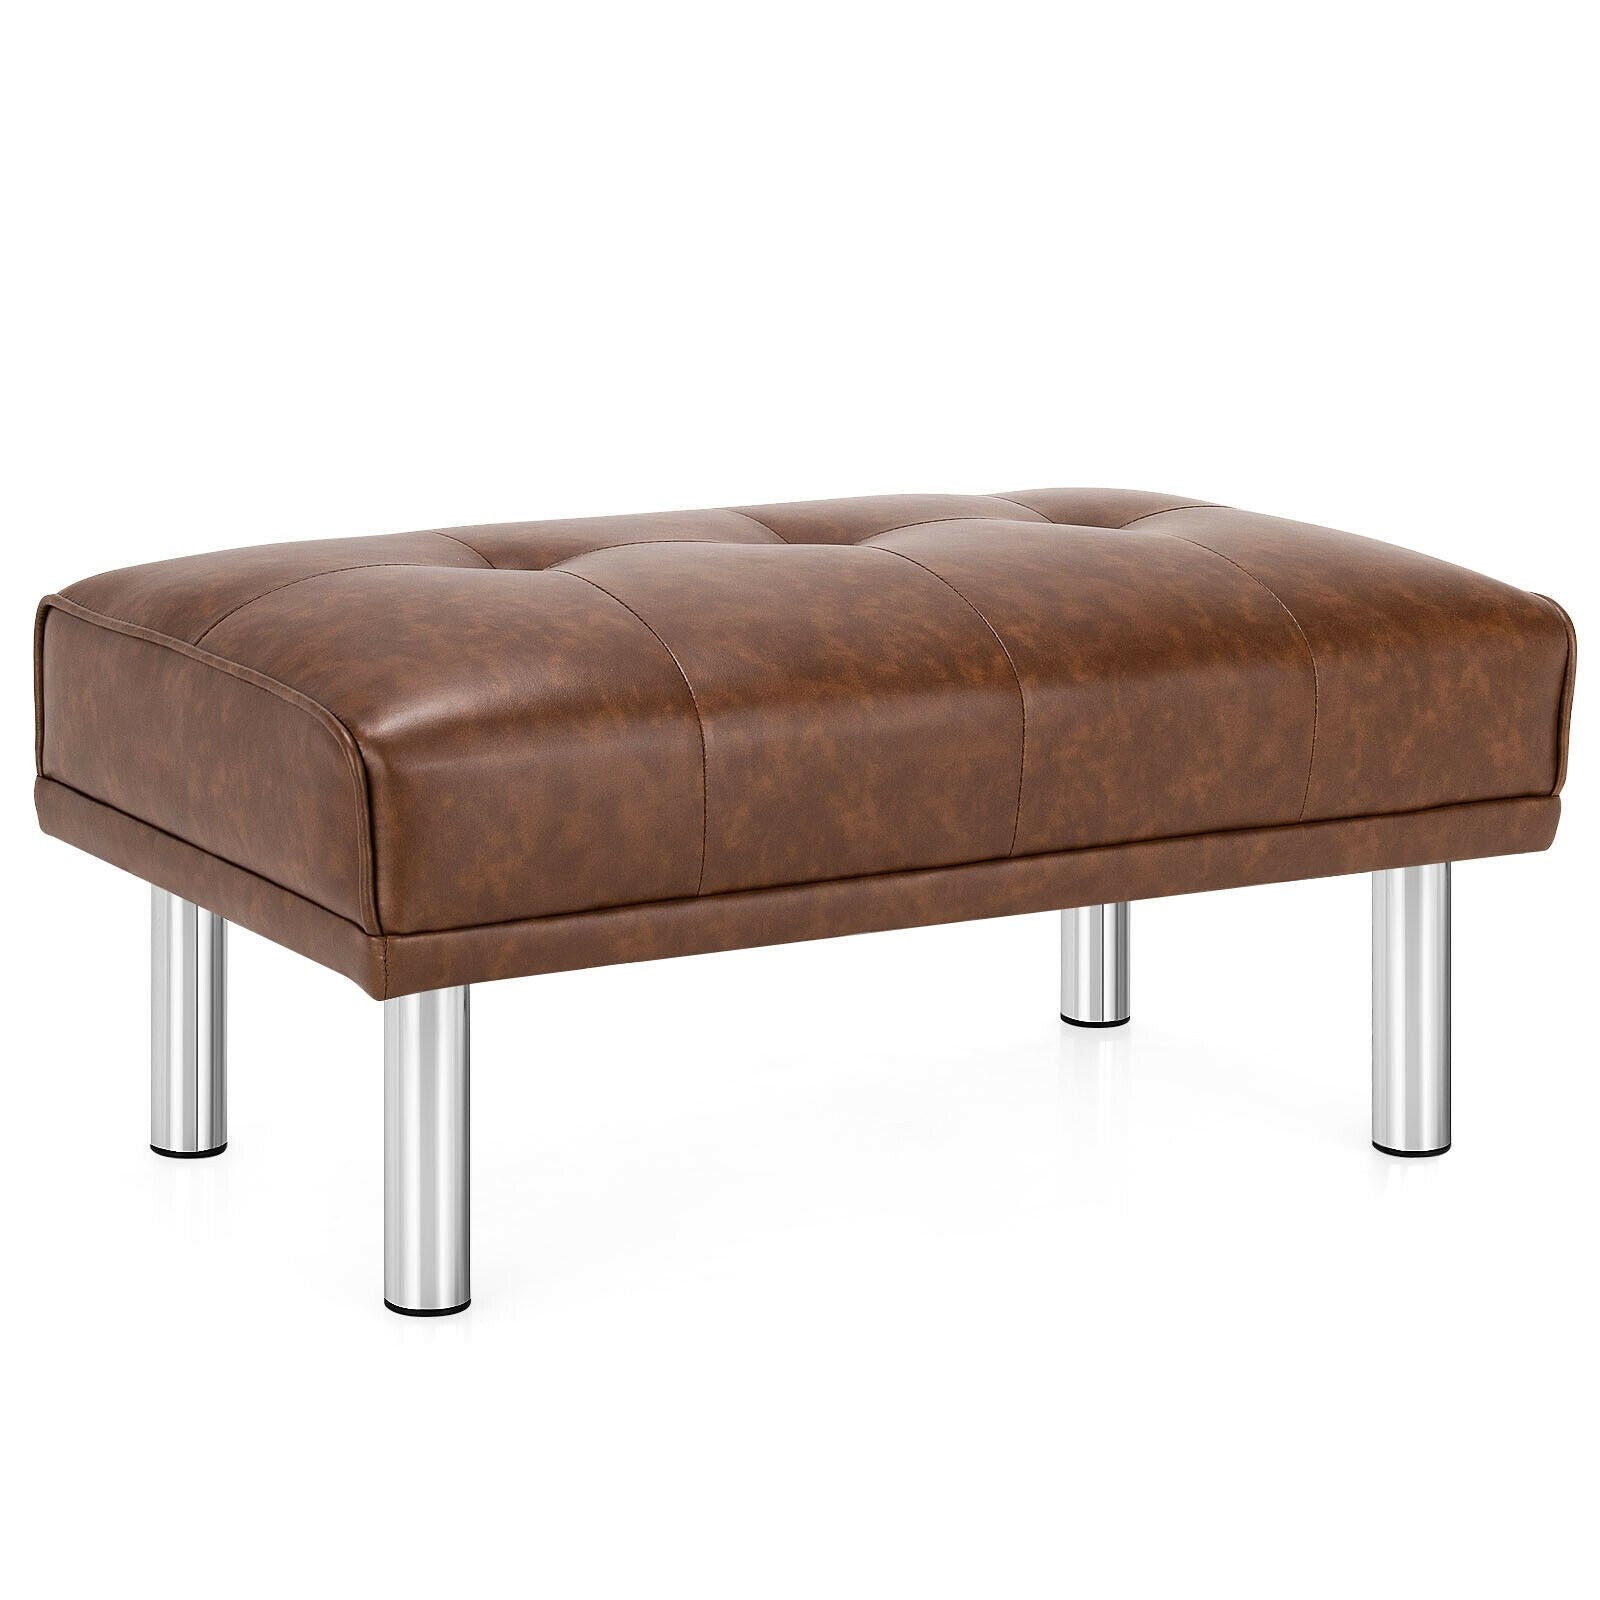 Tufted Ottoman, Rectangle Footrest Stool with Stainless Steel Legs